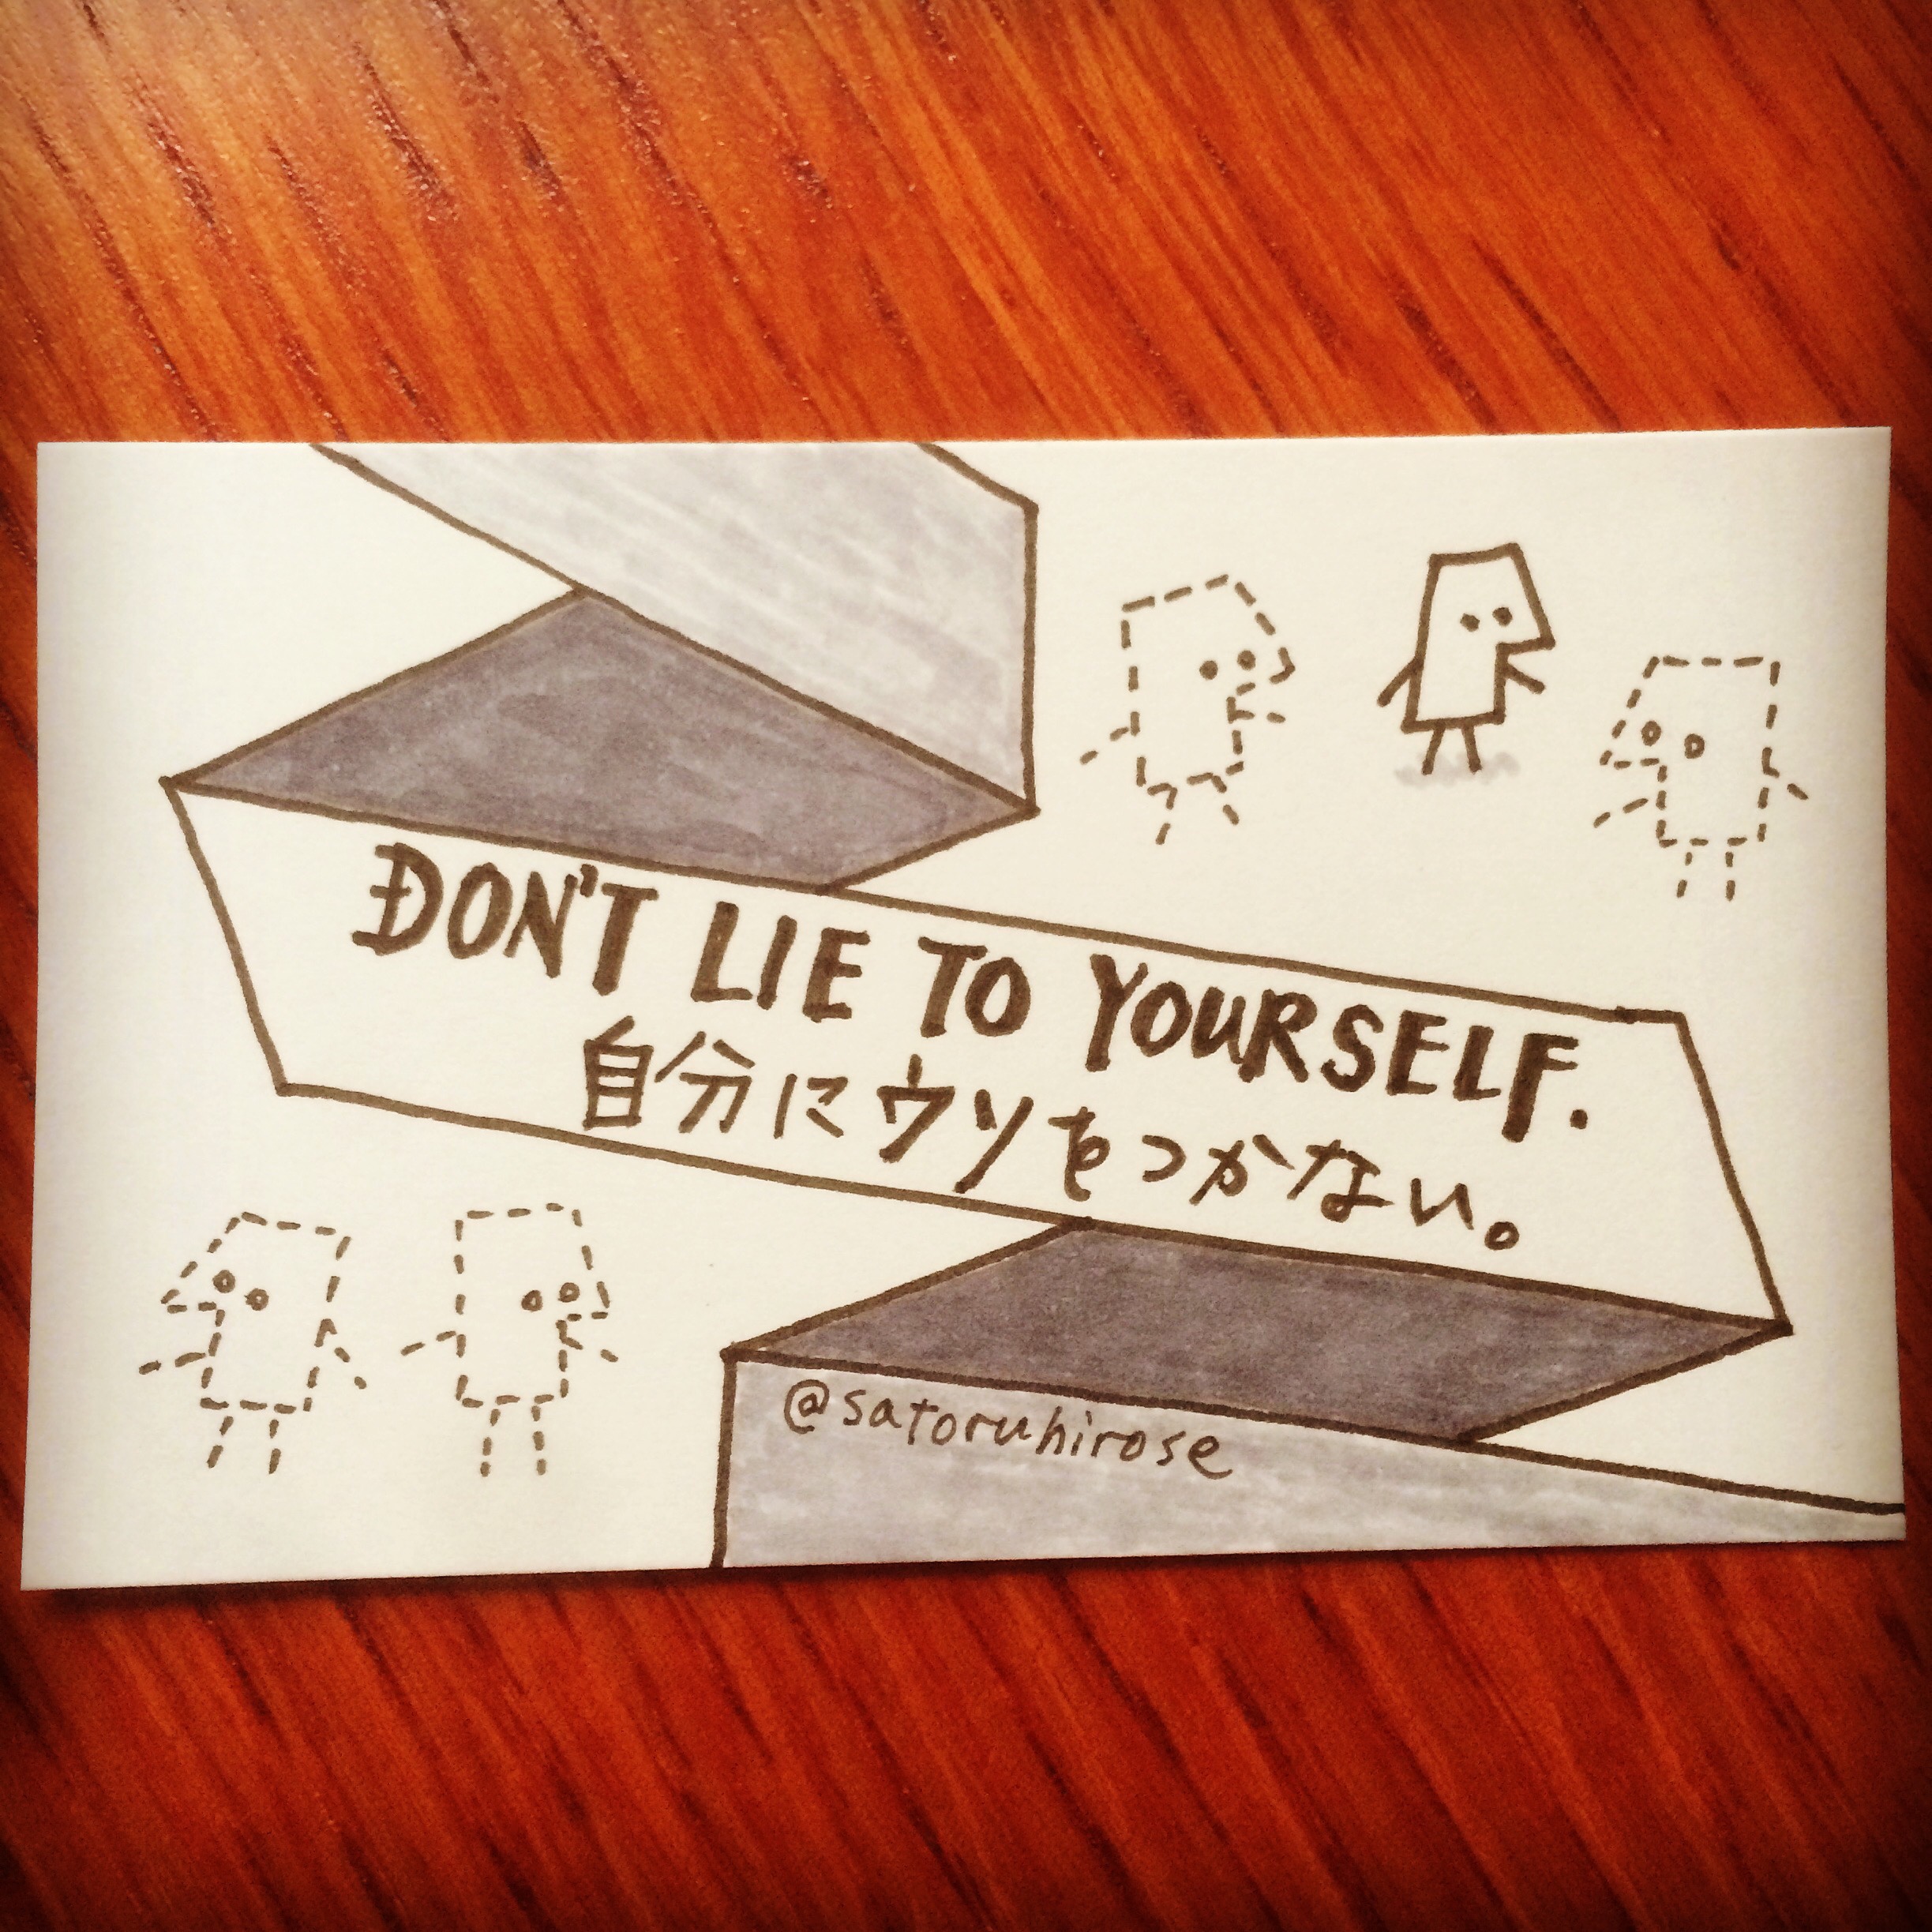 Don't lie to yourself.